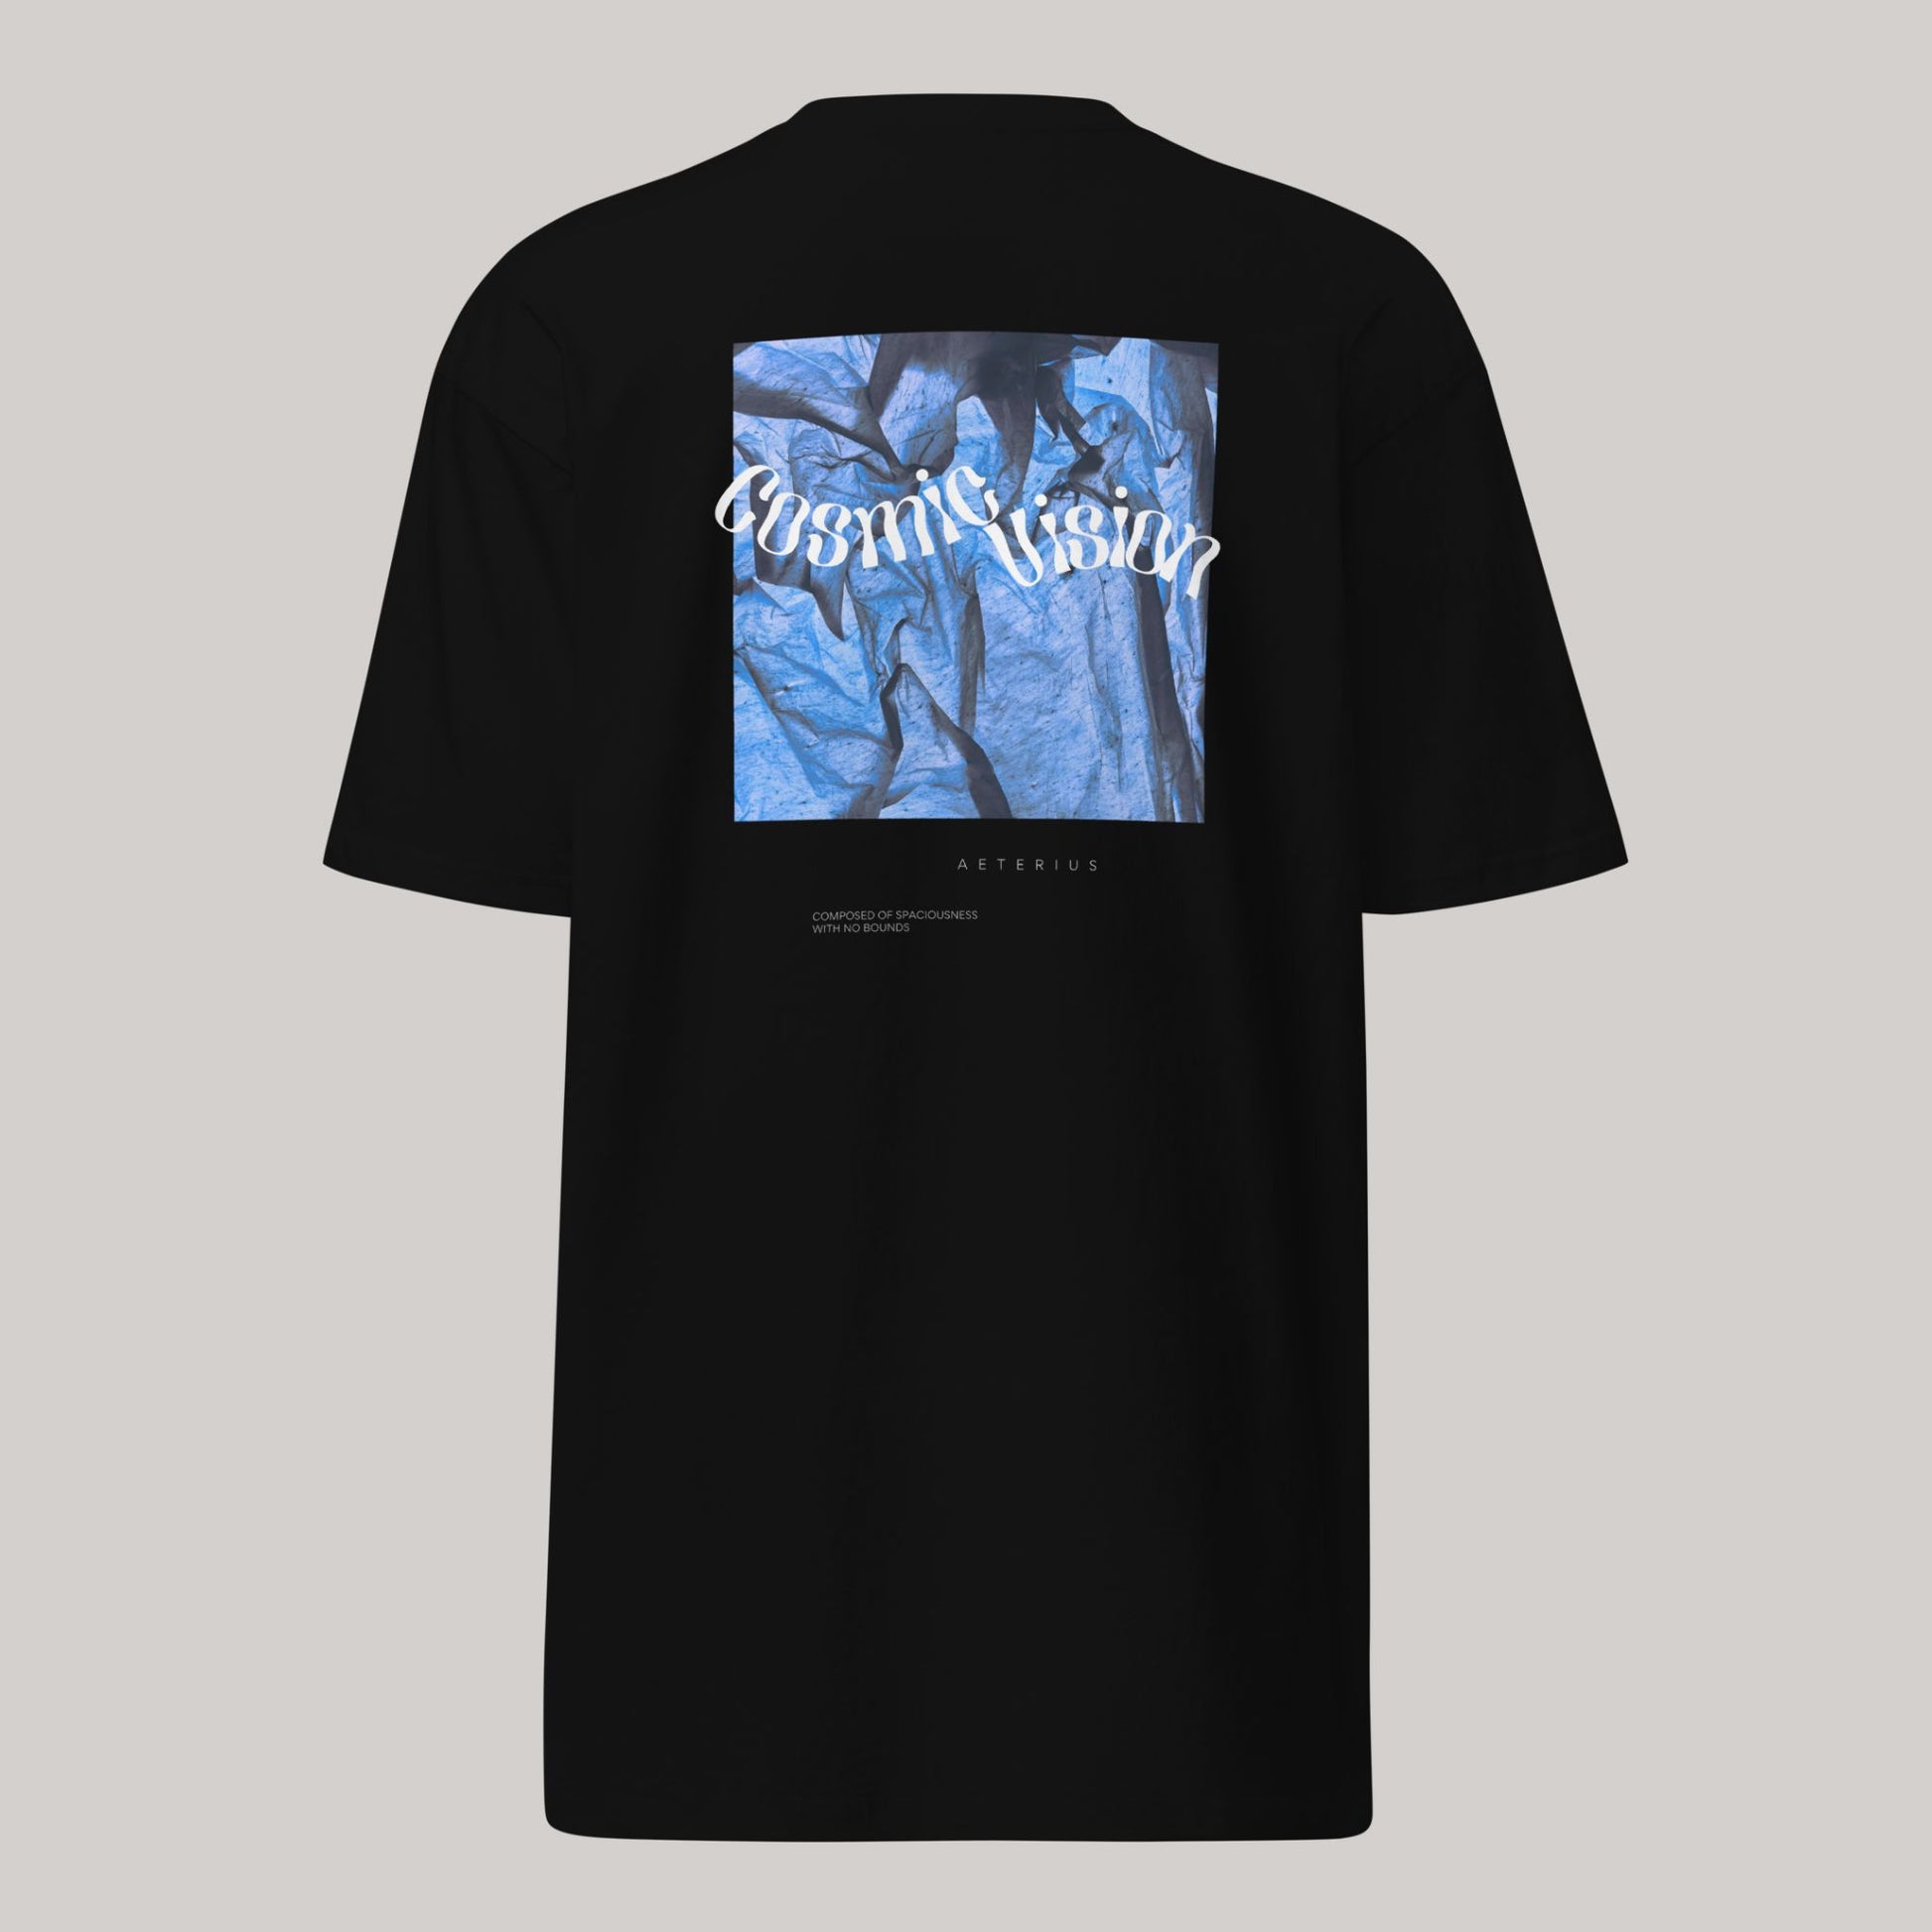 black and blue graphic tee, streetwear t-shirt, aeterius, cosmic vision